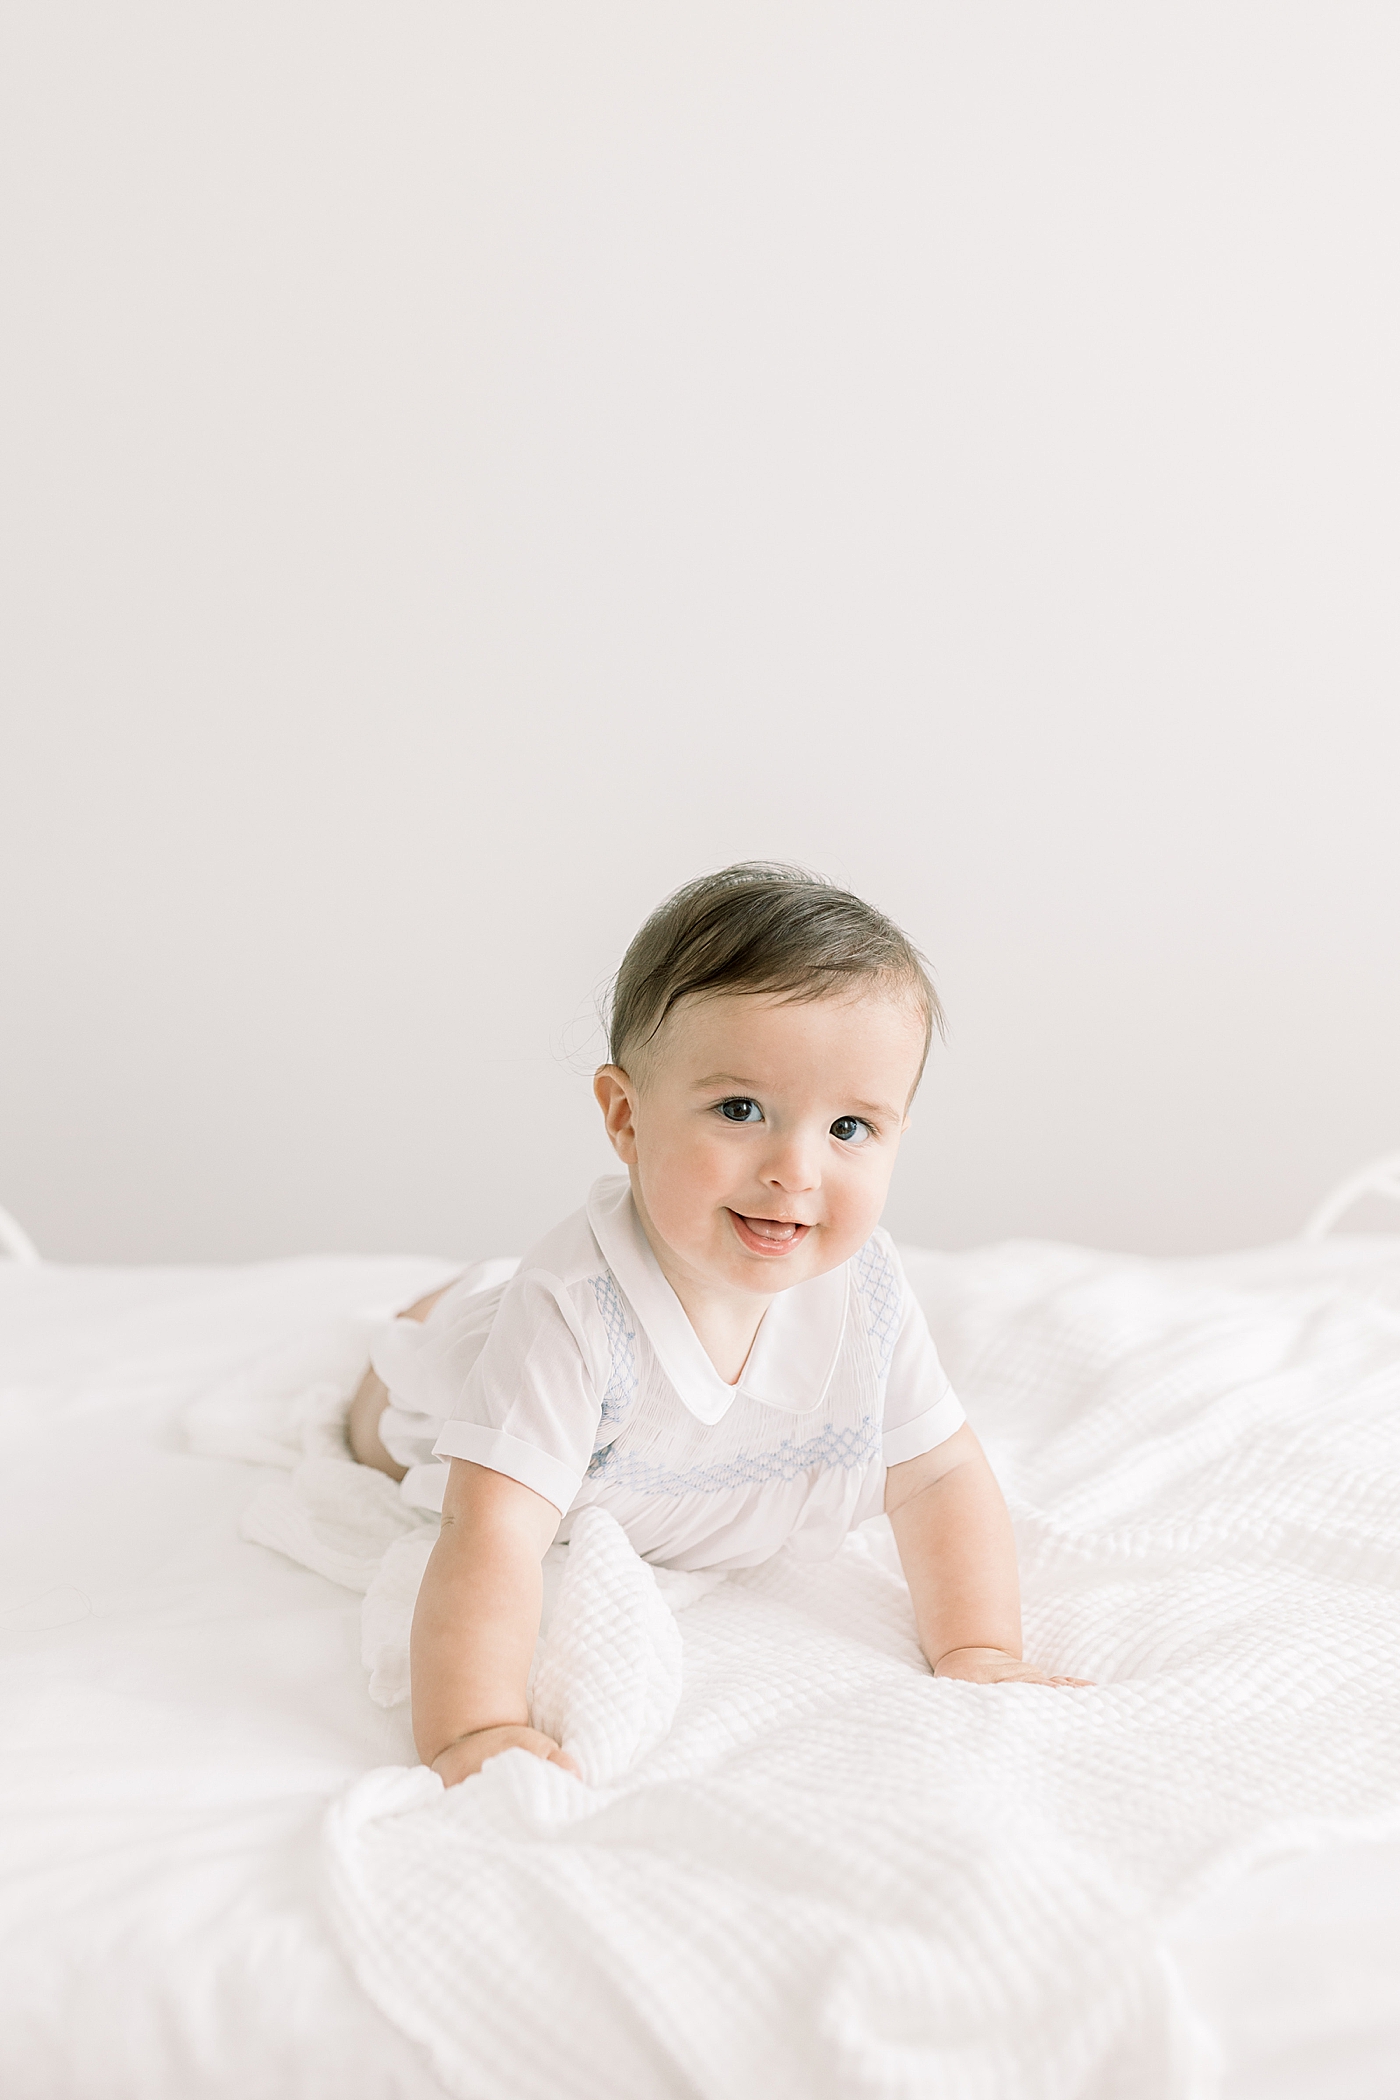 Baby looking at camera and smiling during Studio Milestone Session | Images by Caitlyn Motycka